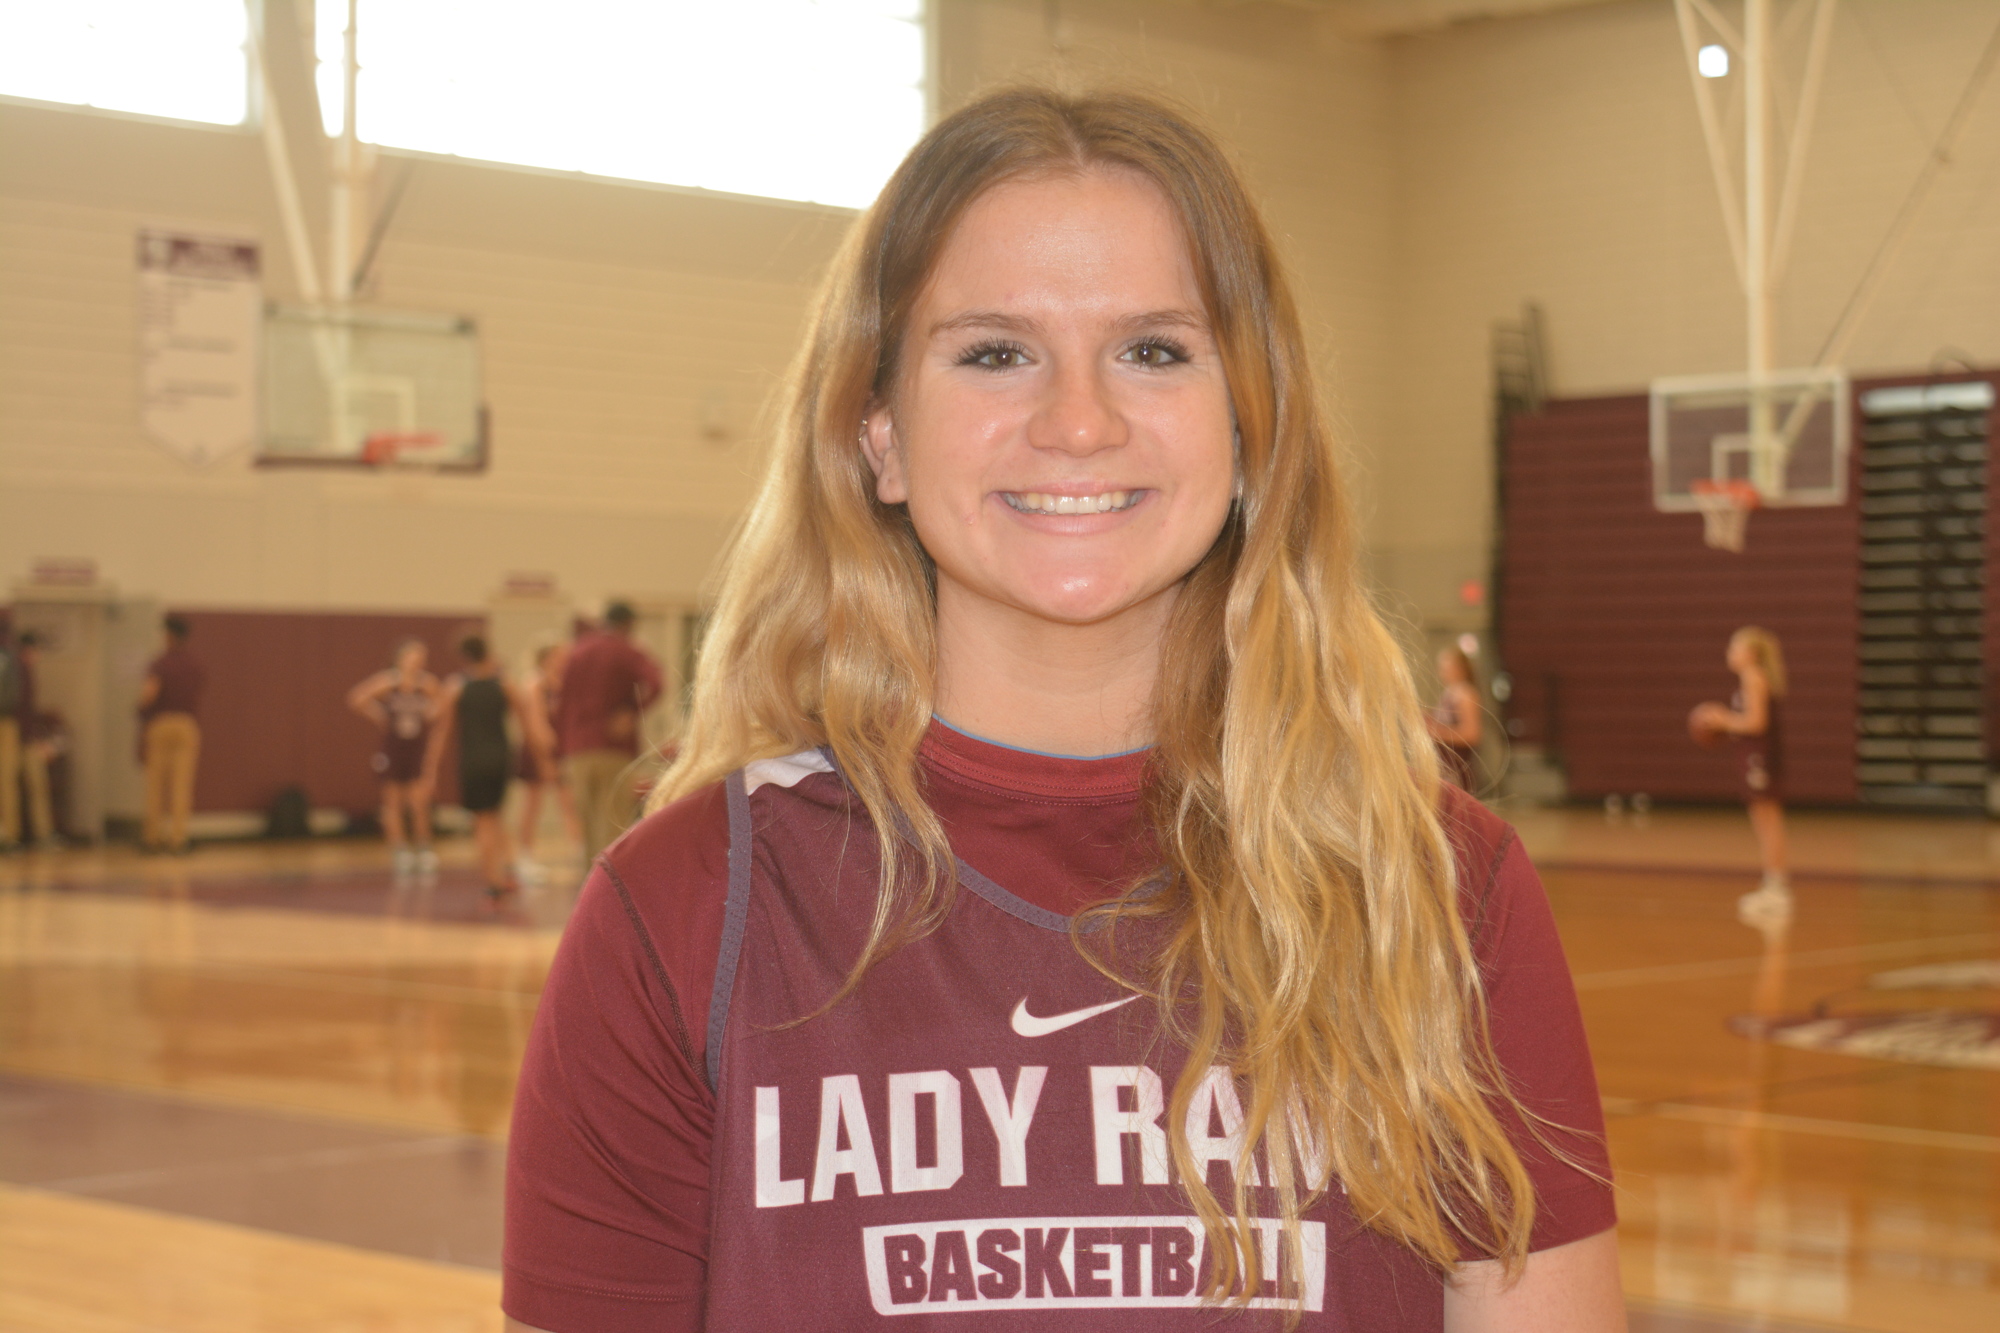 Senior guard Katy Dean is averaging 16.3 points per game for Riverview girls basketball.